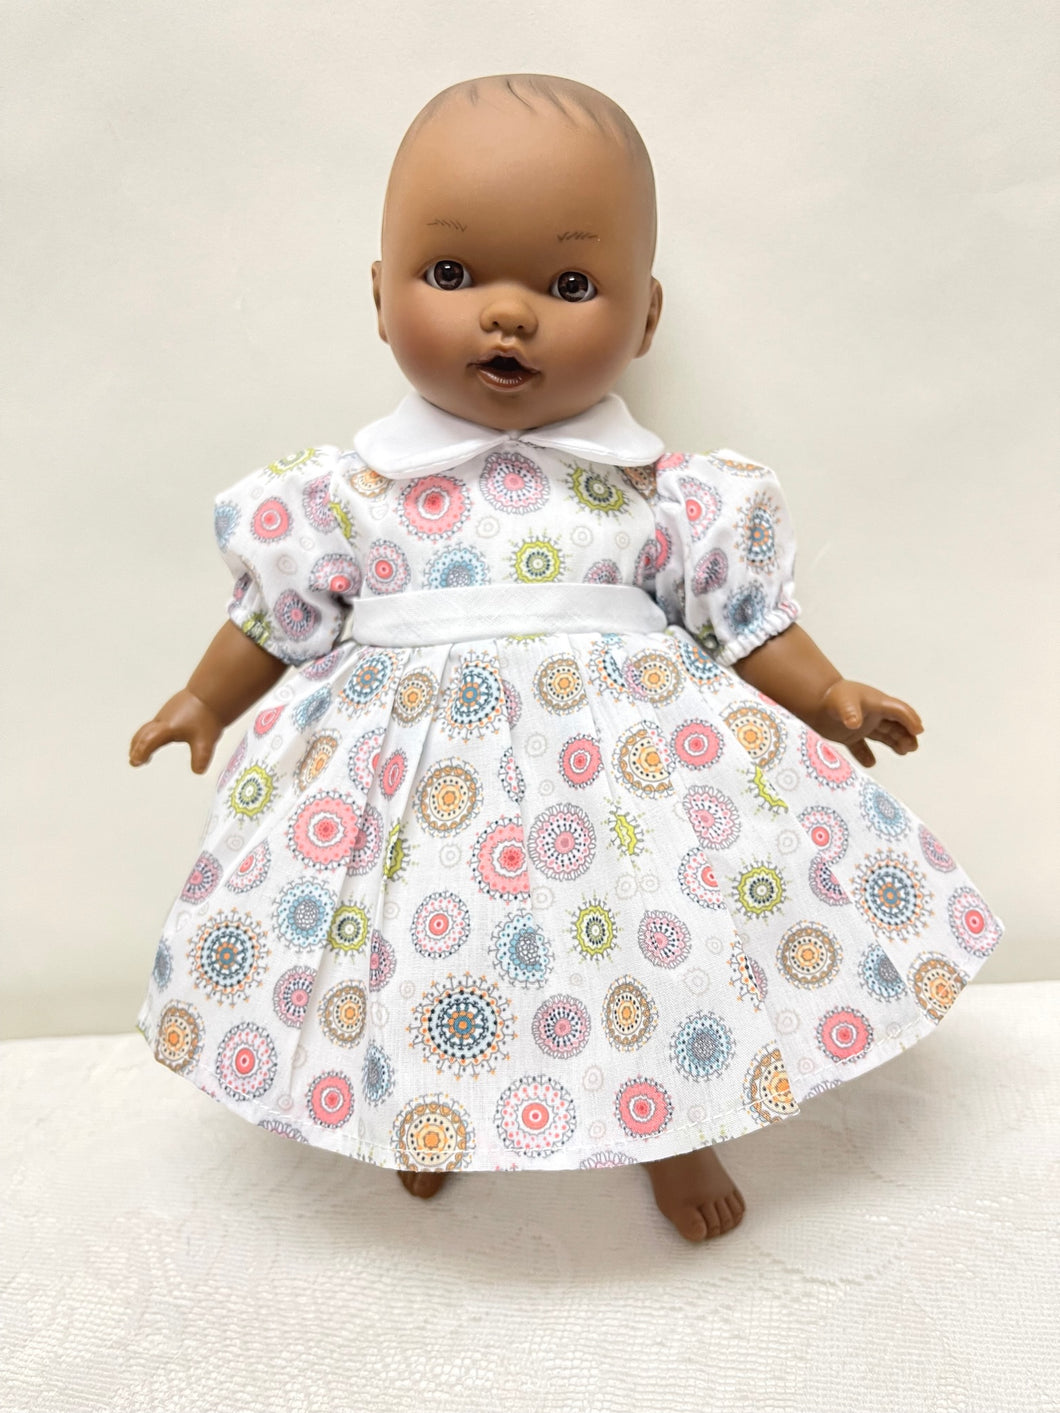 Brittany Doll with Brown Eyes 10 inch Doll (Doll Dress sold Separately)